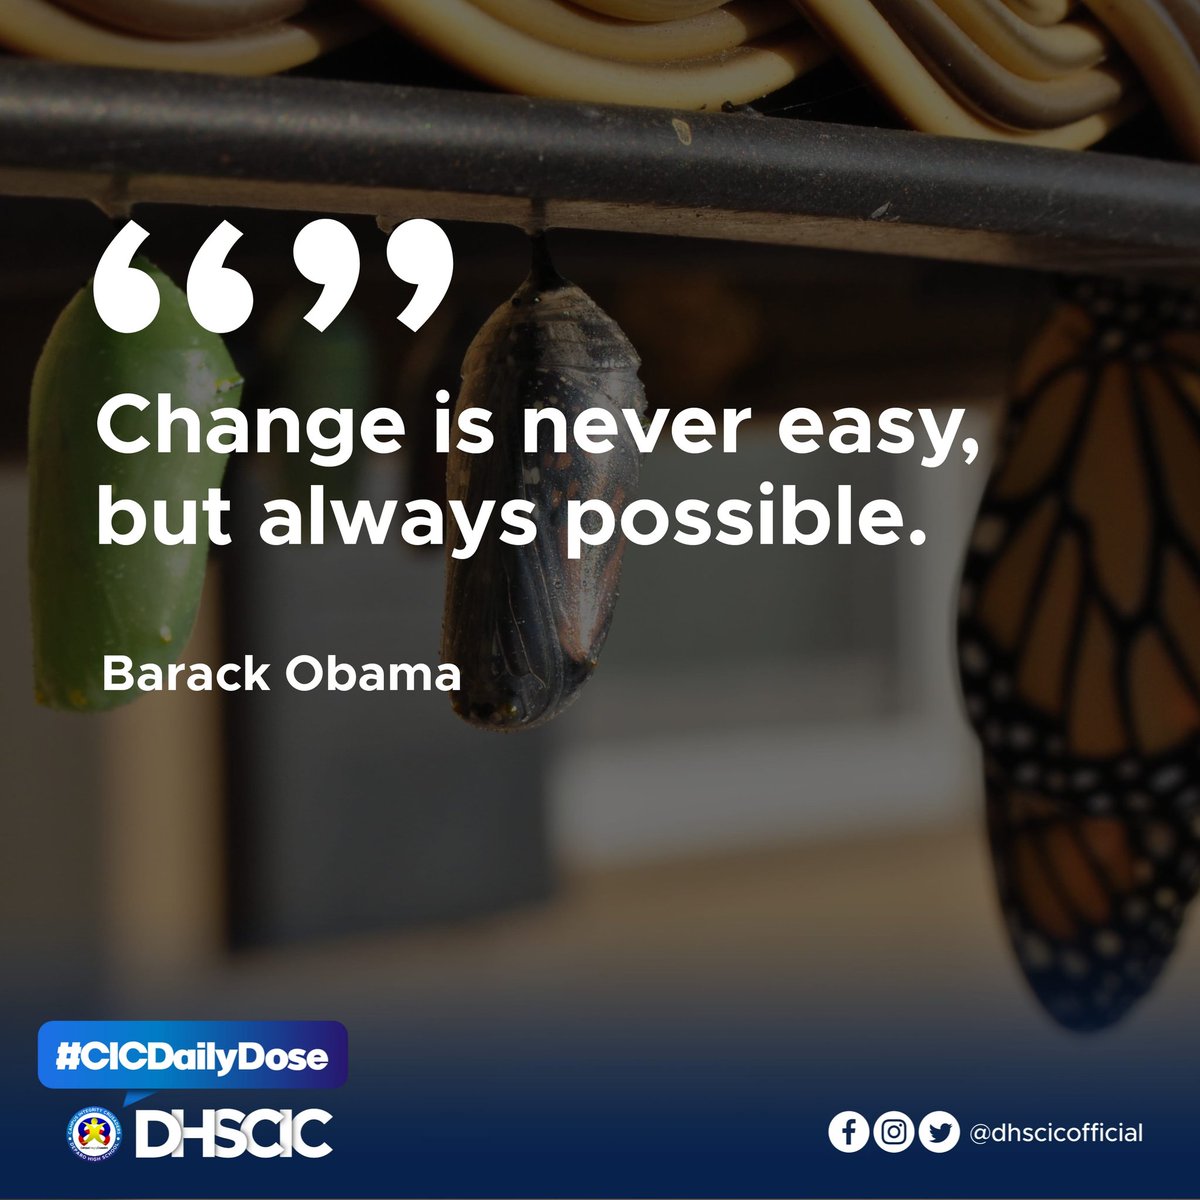 Change is inevitable in this world. It is a part of our life. Let go of the painful past and embrace your change. Get out of your comfort zone and unfurl your wings to the world. Be the best version of yourself in this constantly changing world

#CICDailyDose #SeeWhatISee #DHSCIC